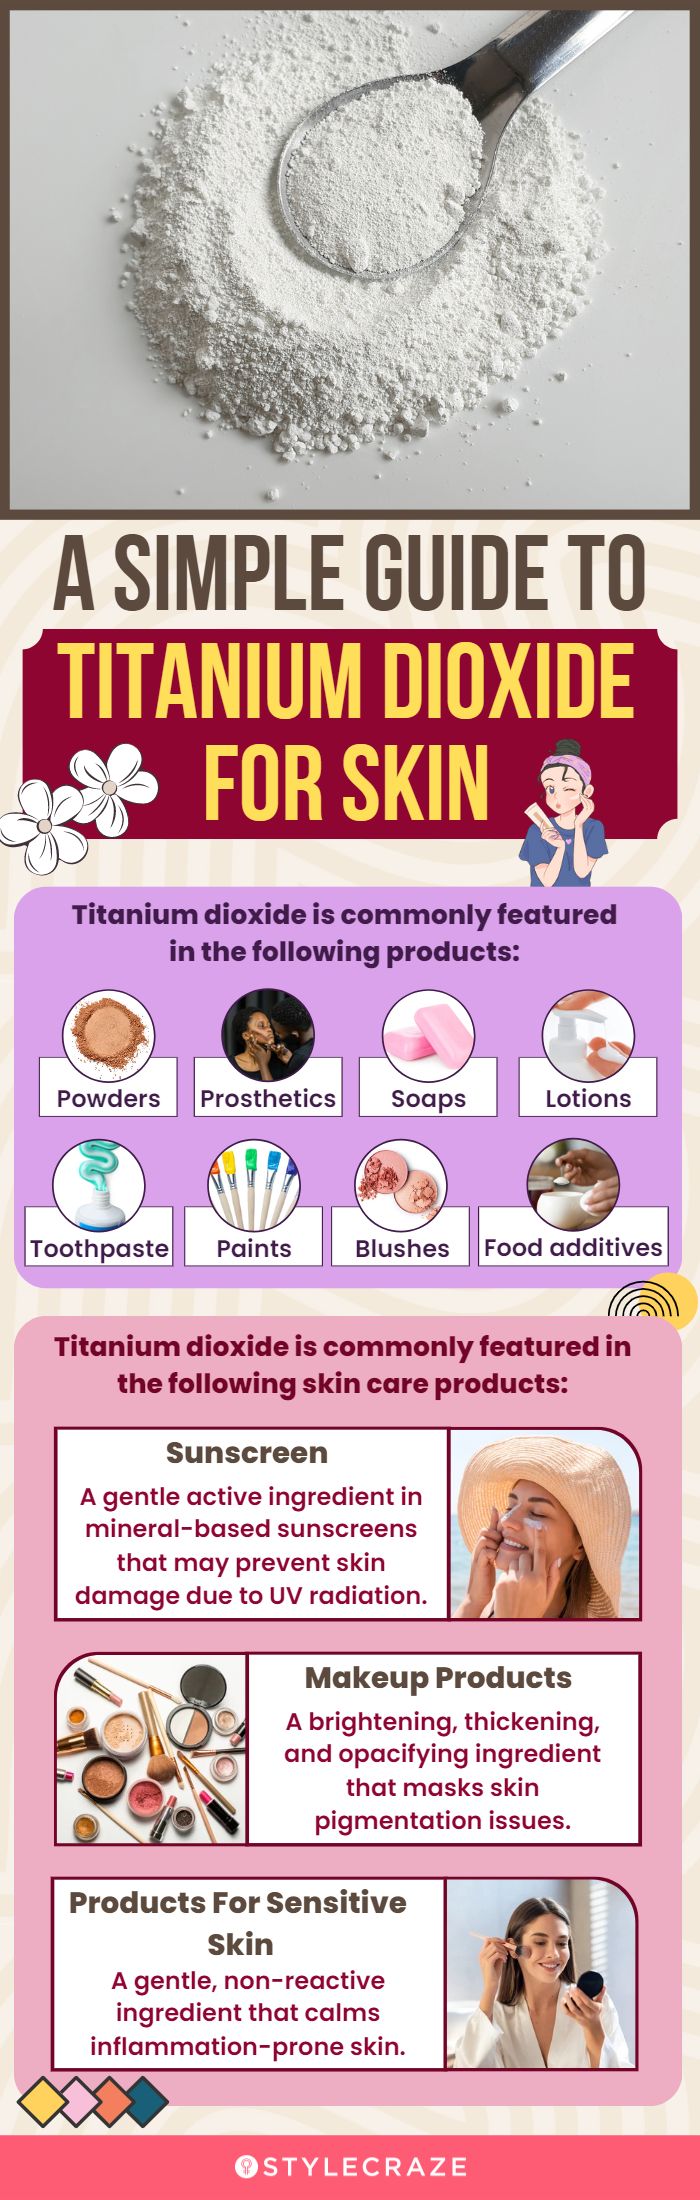 a simple guide to titanium dioxide for skin (infographic)